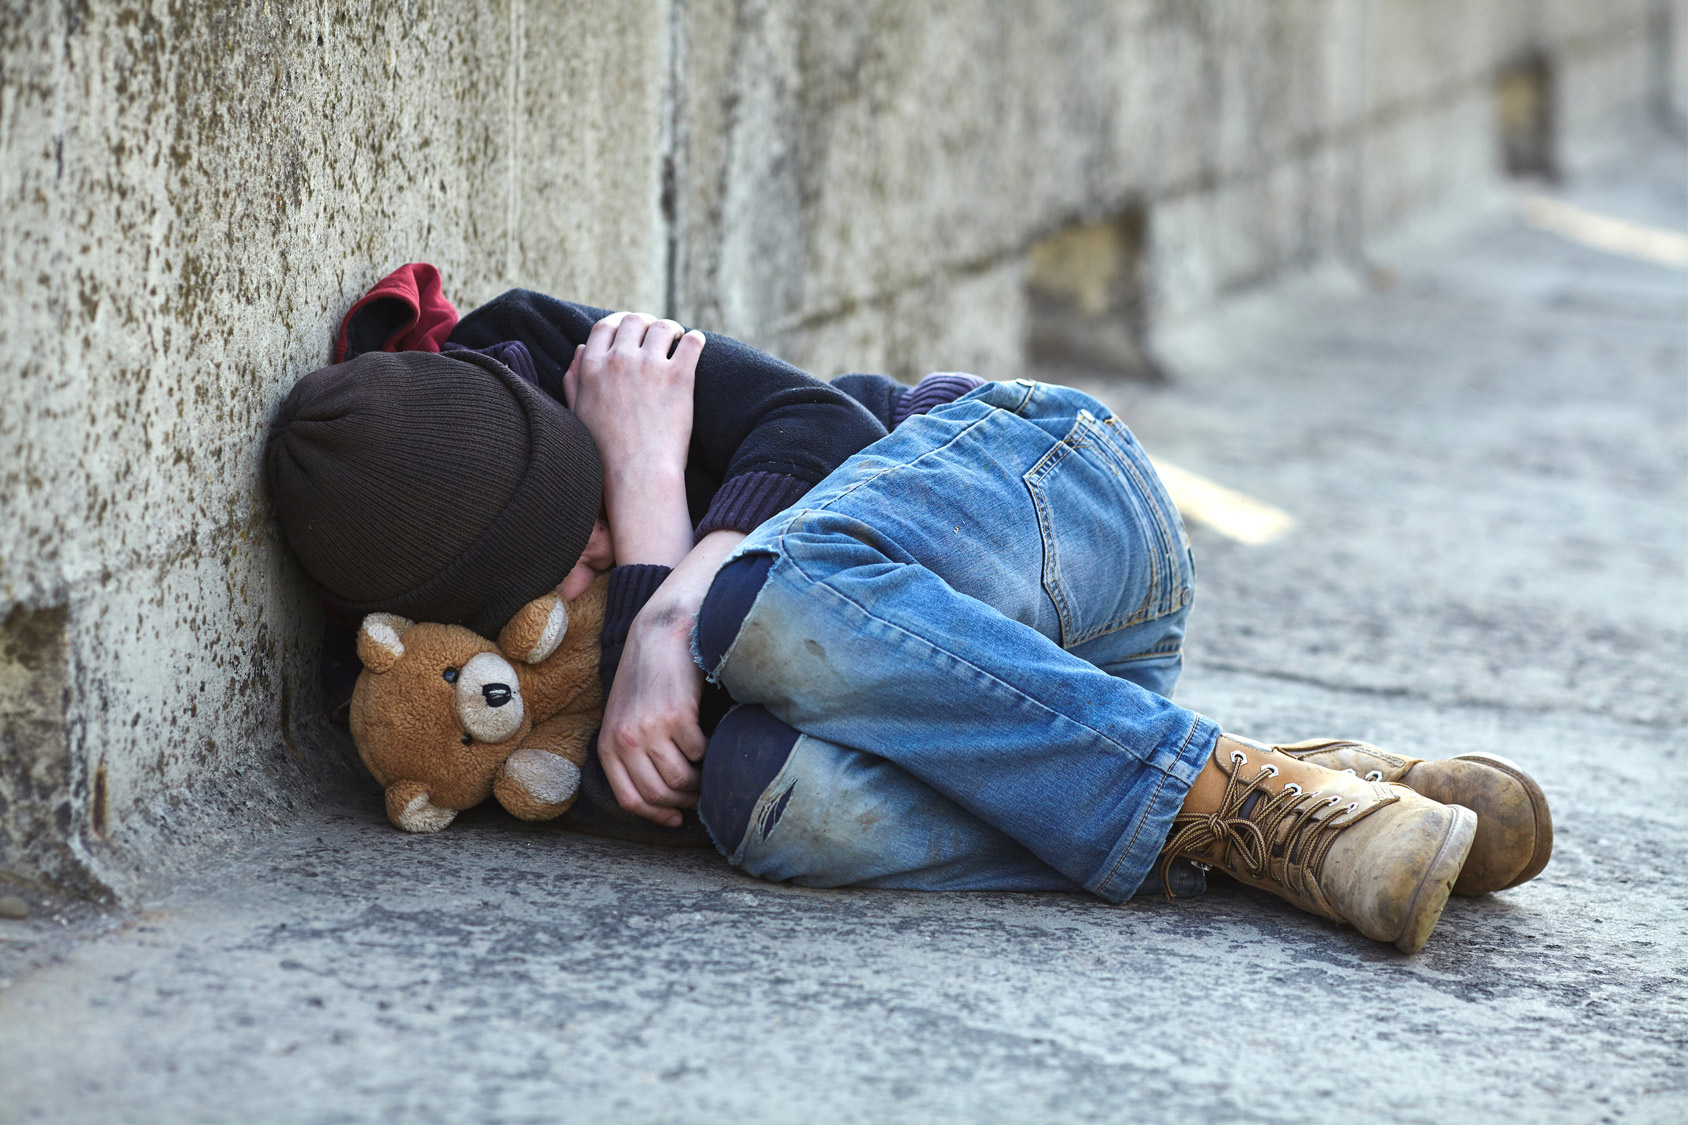 Child laying on ground with teddy bear in his arms